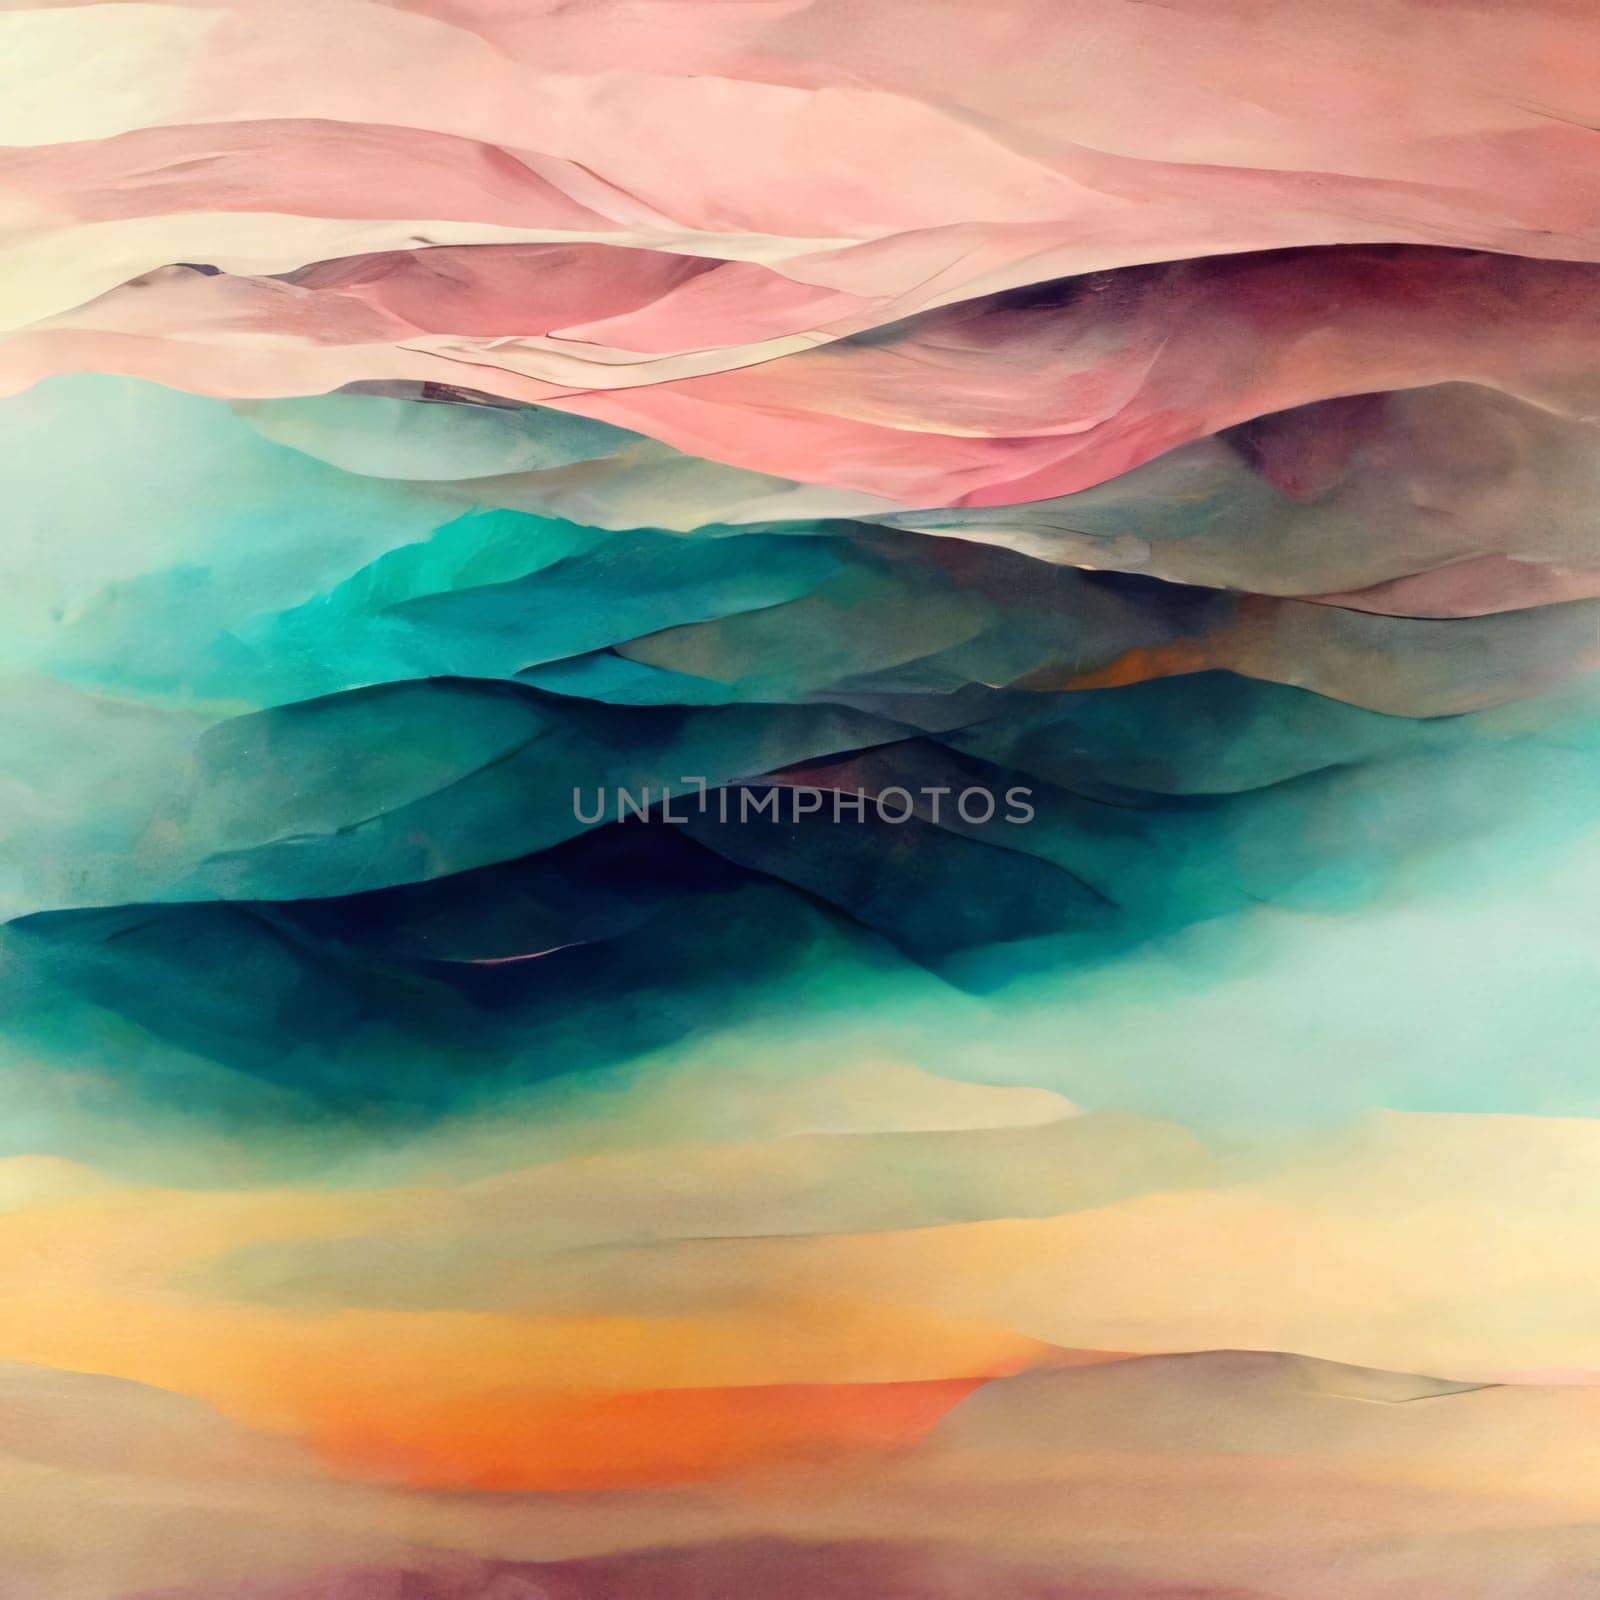 Abstract background design: Abstract watercolor background. Digital art painting. Hand-drawn illustration.